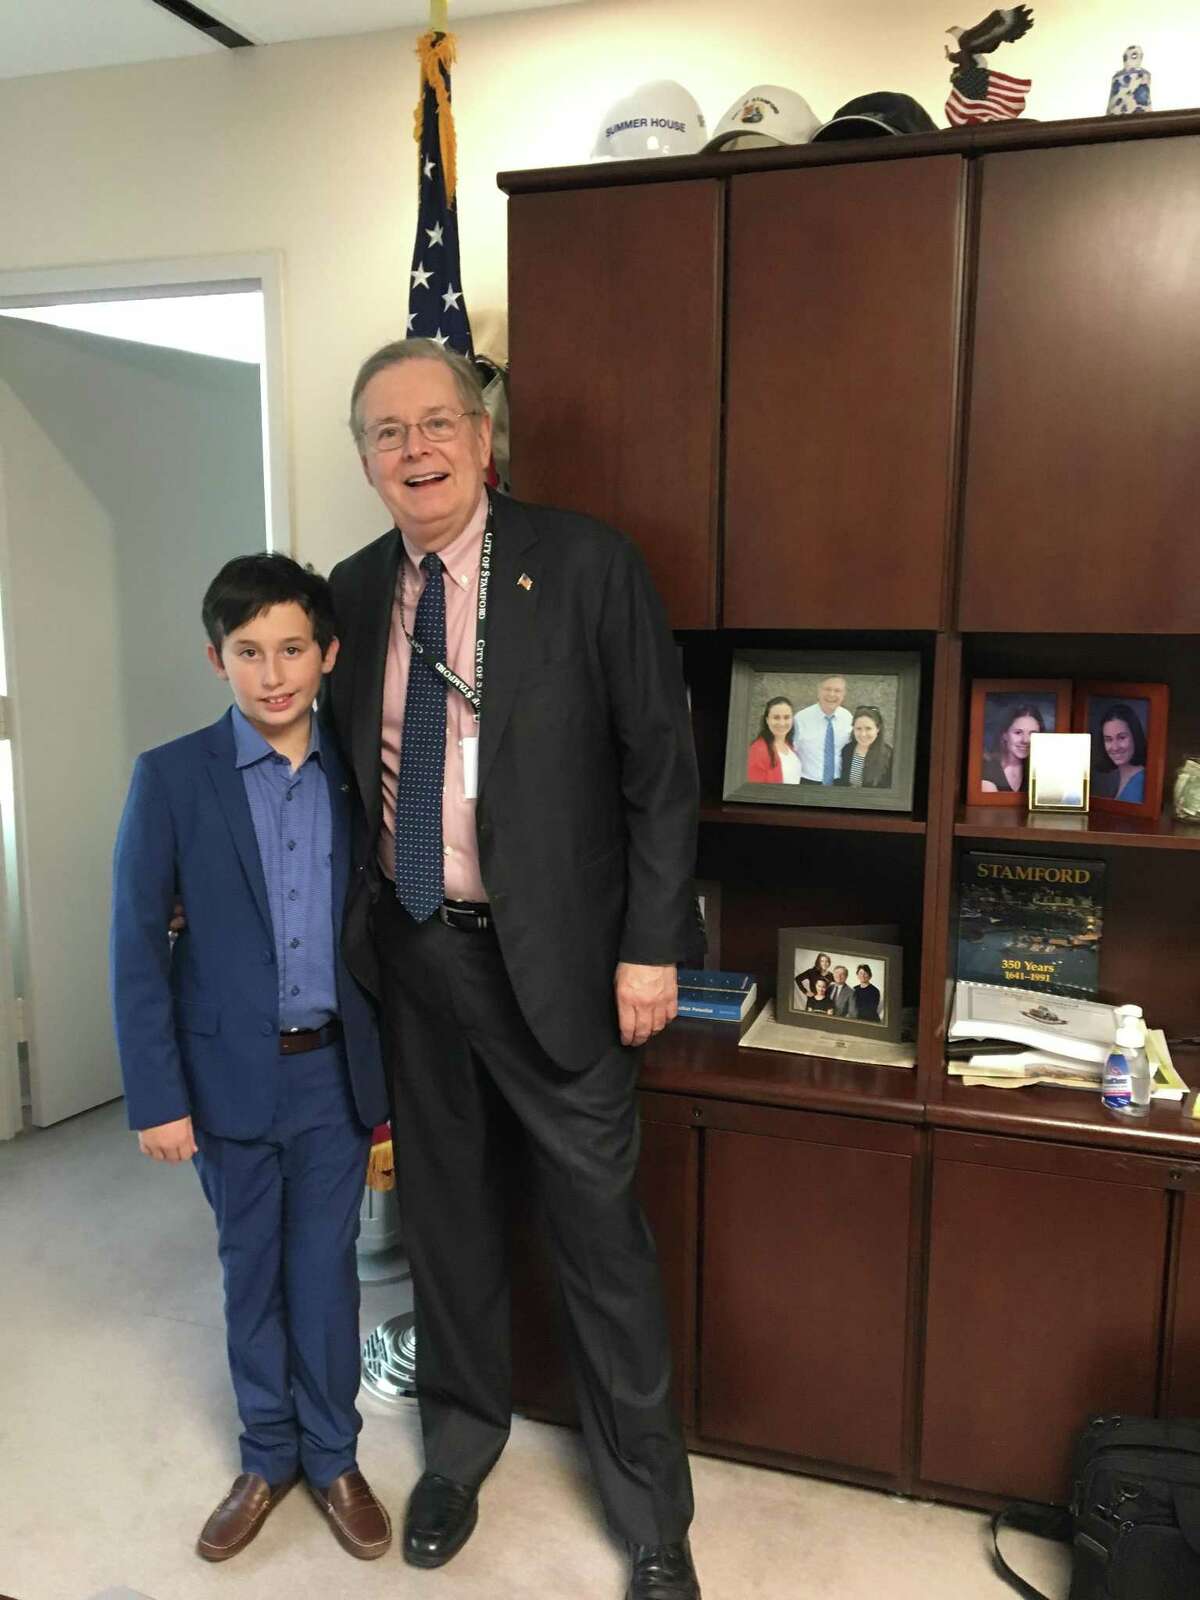 Jordan Alexander and Stamford Mayor David Martin during the New Canaan boy’s stint as “Mayor for a Day.”